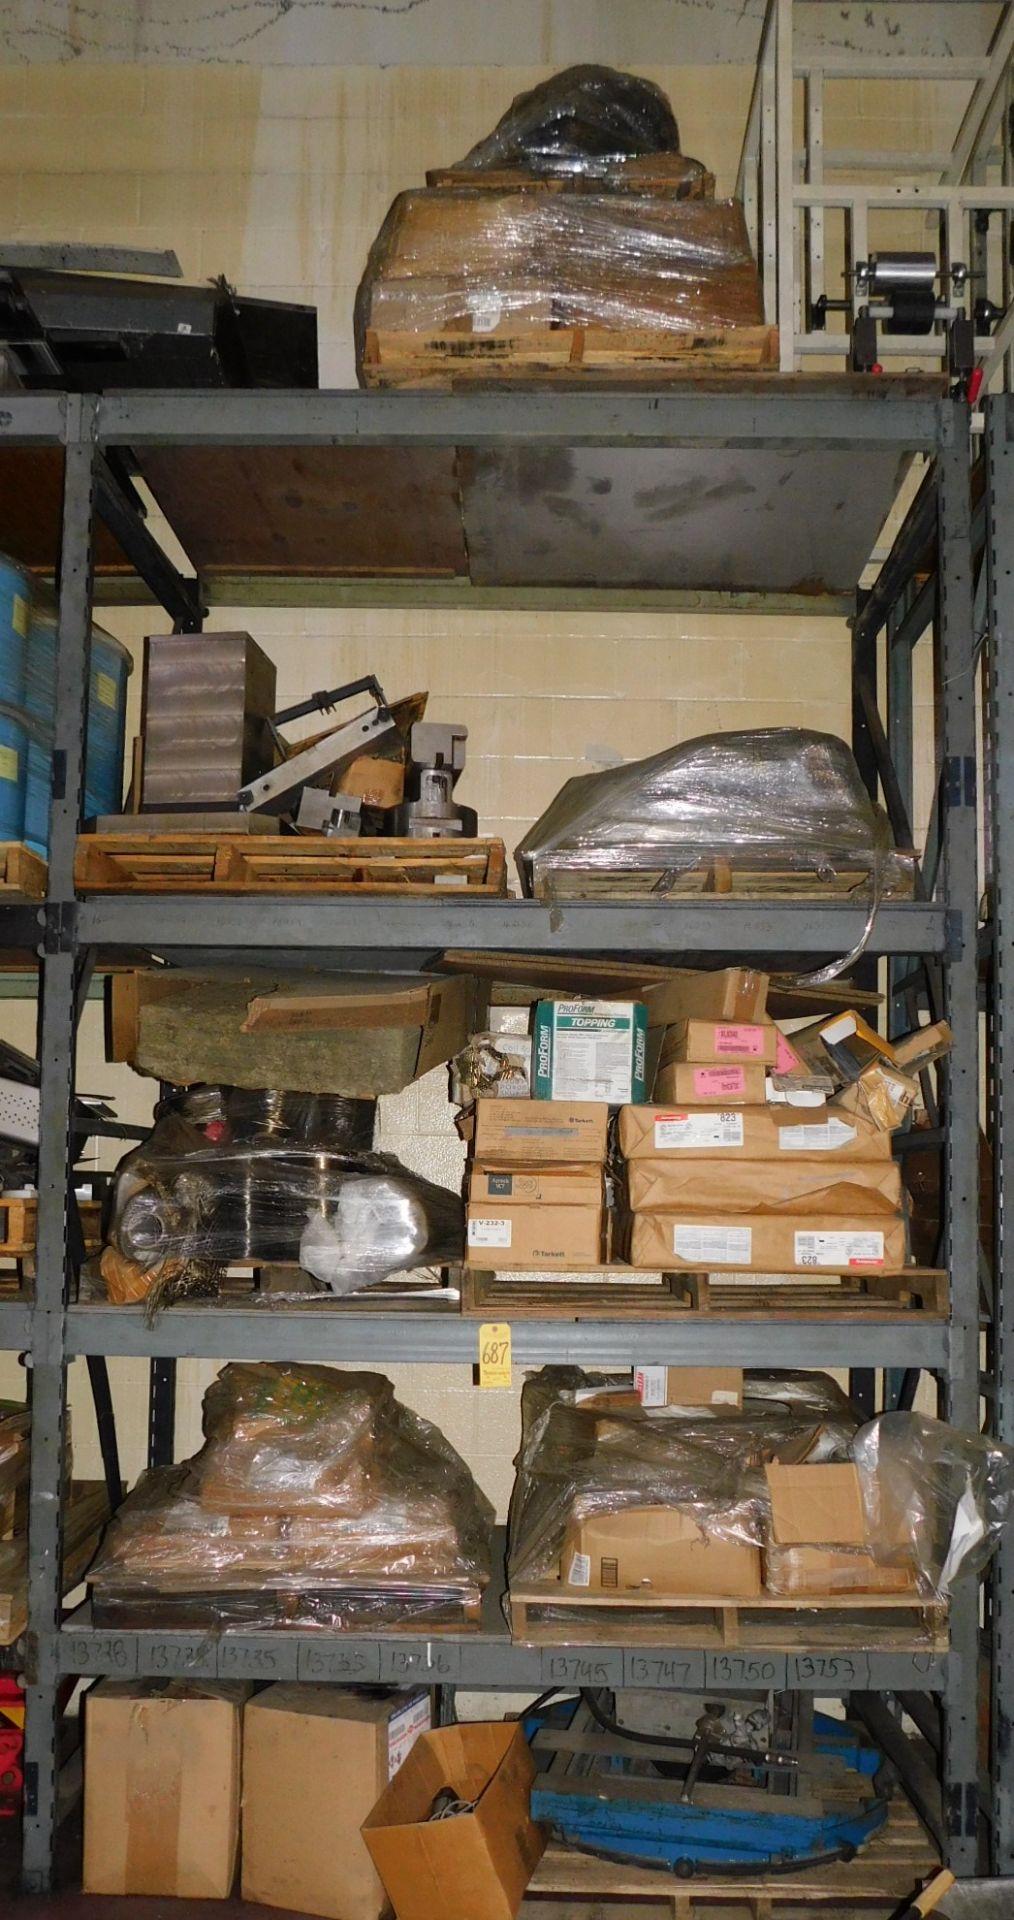 Contents of (1) Section of Pallet Shelving